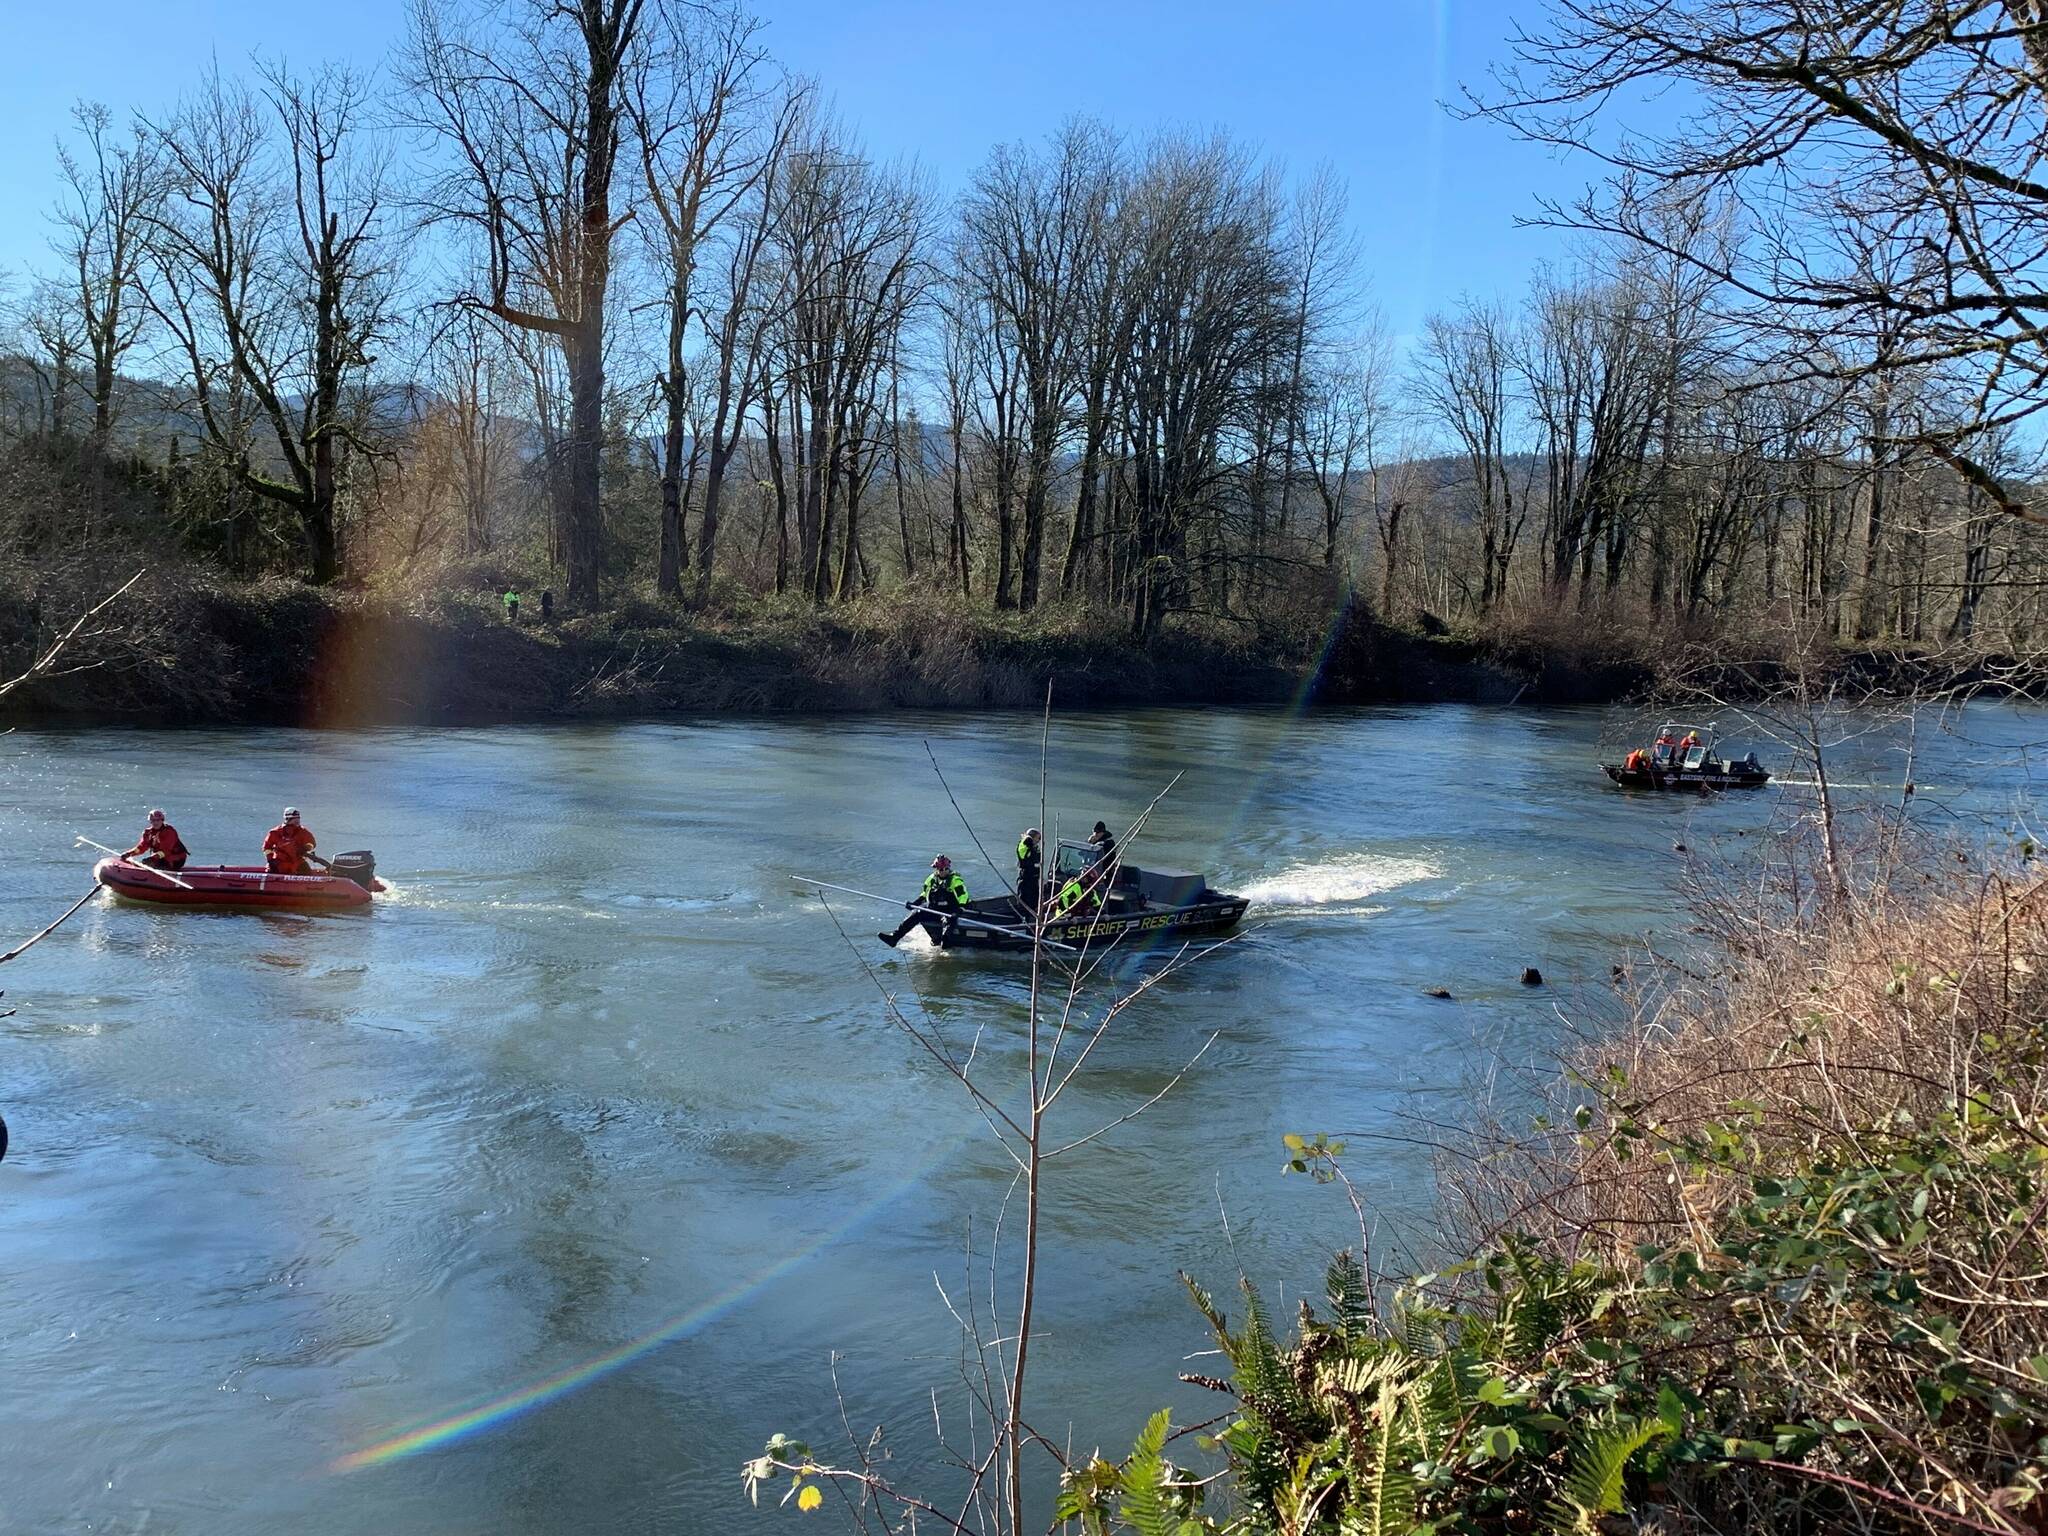 Search and Rescue Crews look for car crash victims along Snoqualmie River near Fall City. File Photo courtesy of Washington State Patrol.